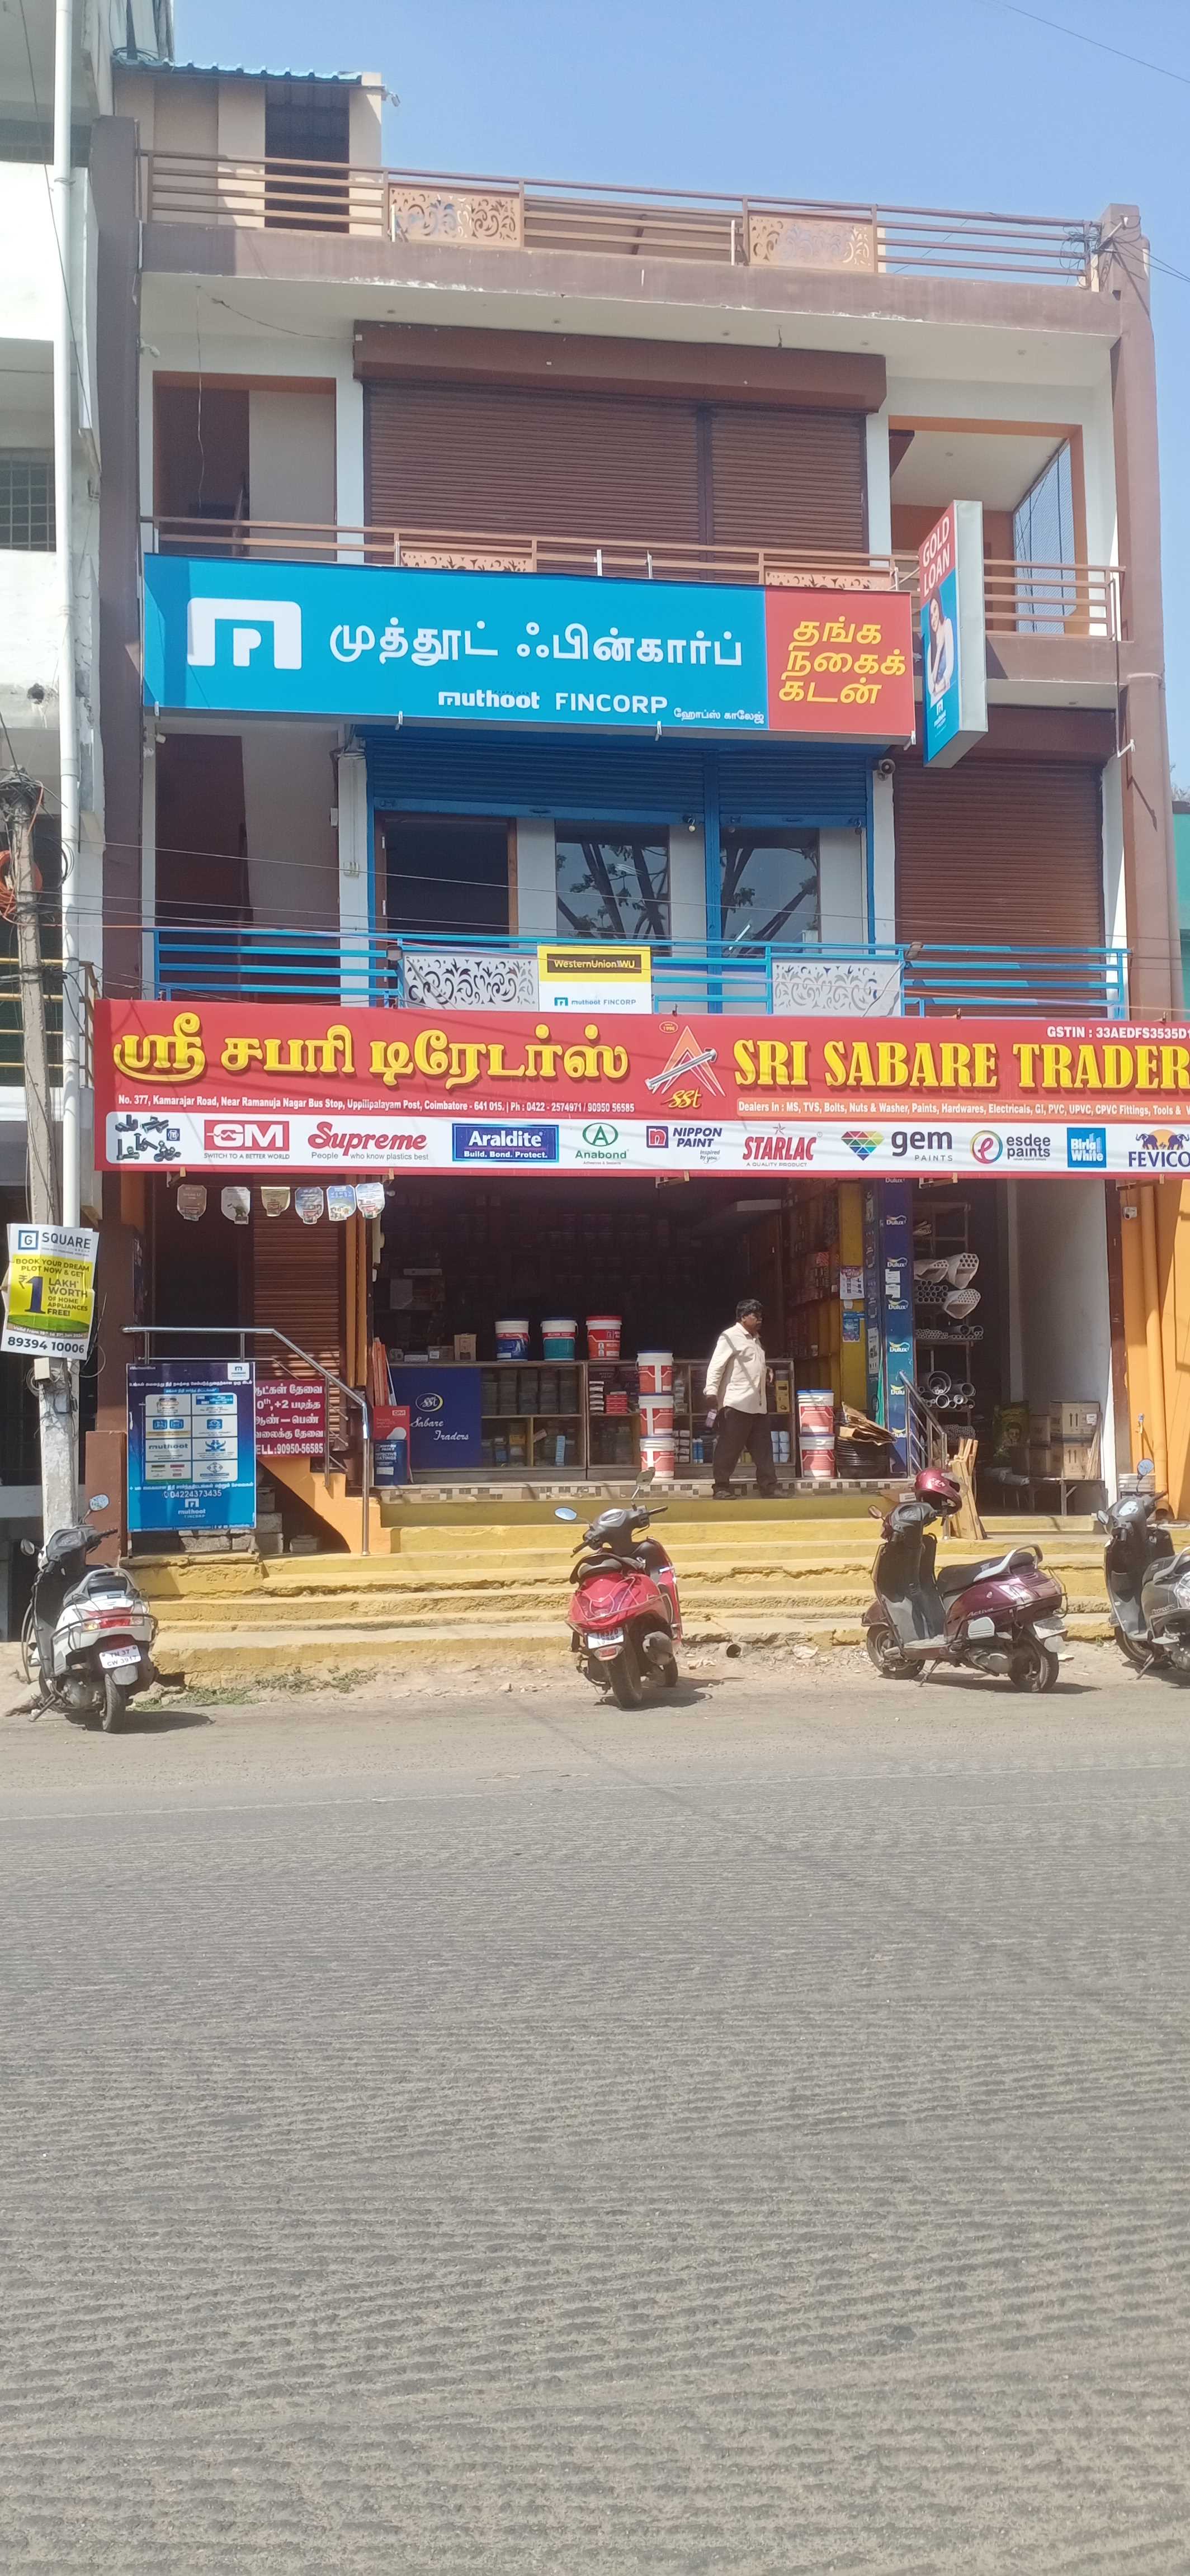 Muthoot Fincorp Gold Loan Services in Uppilipalayam, Coimbatore, Tamil Nadu